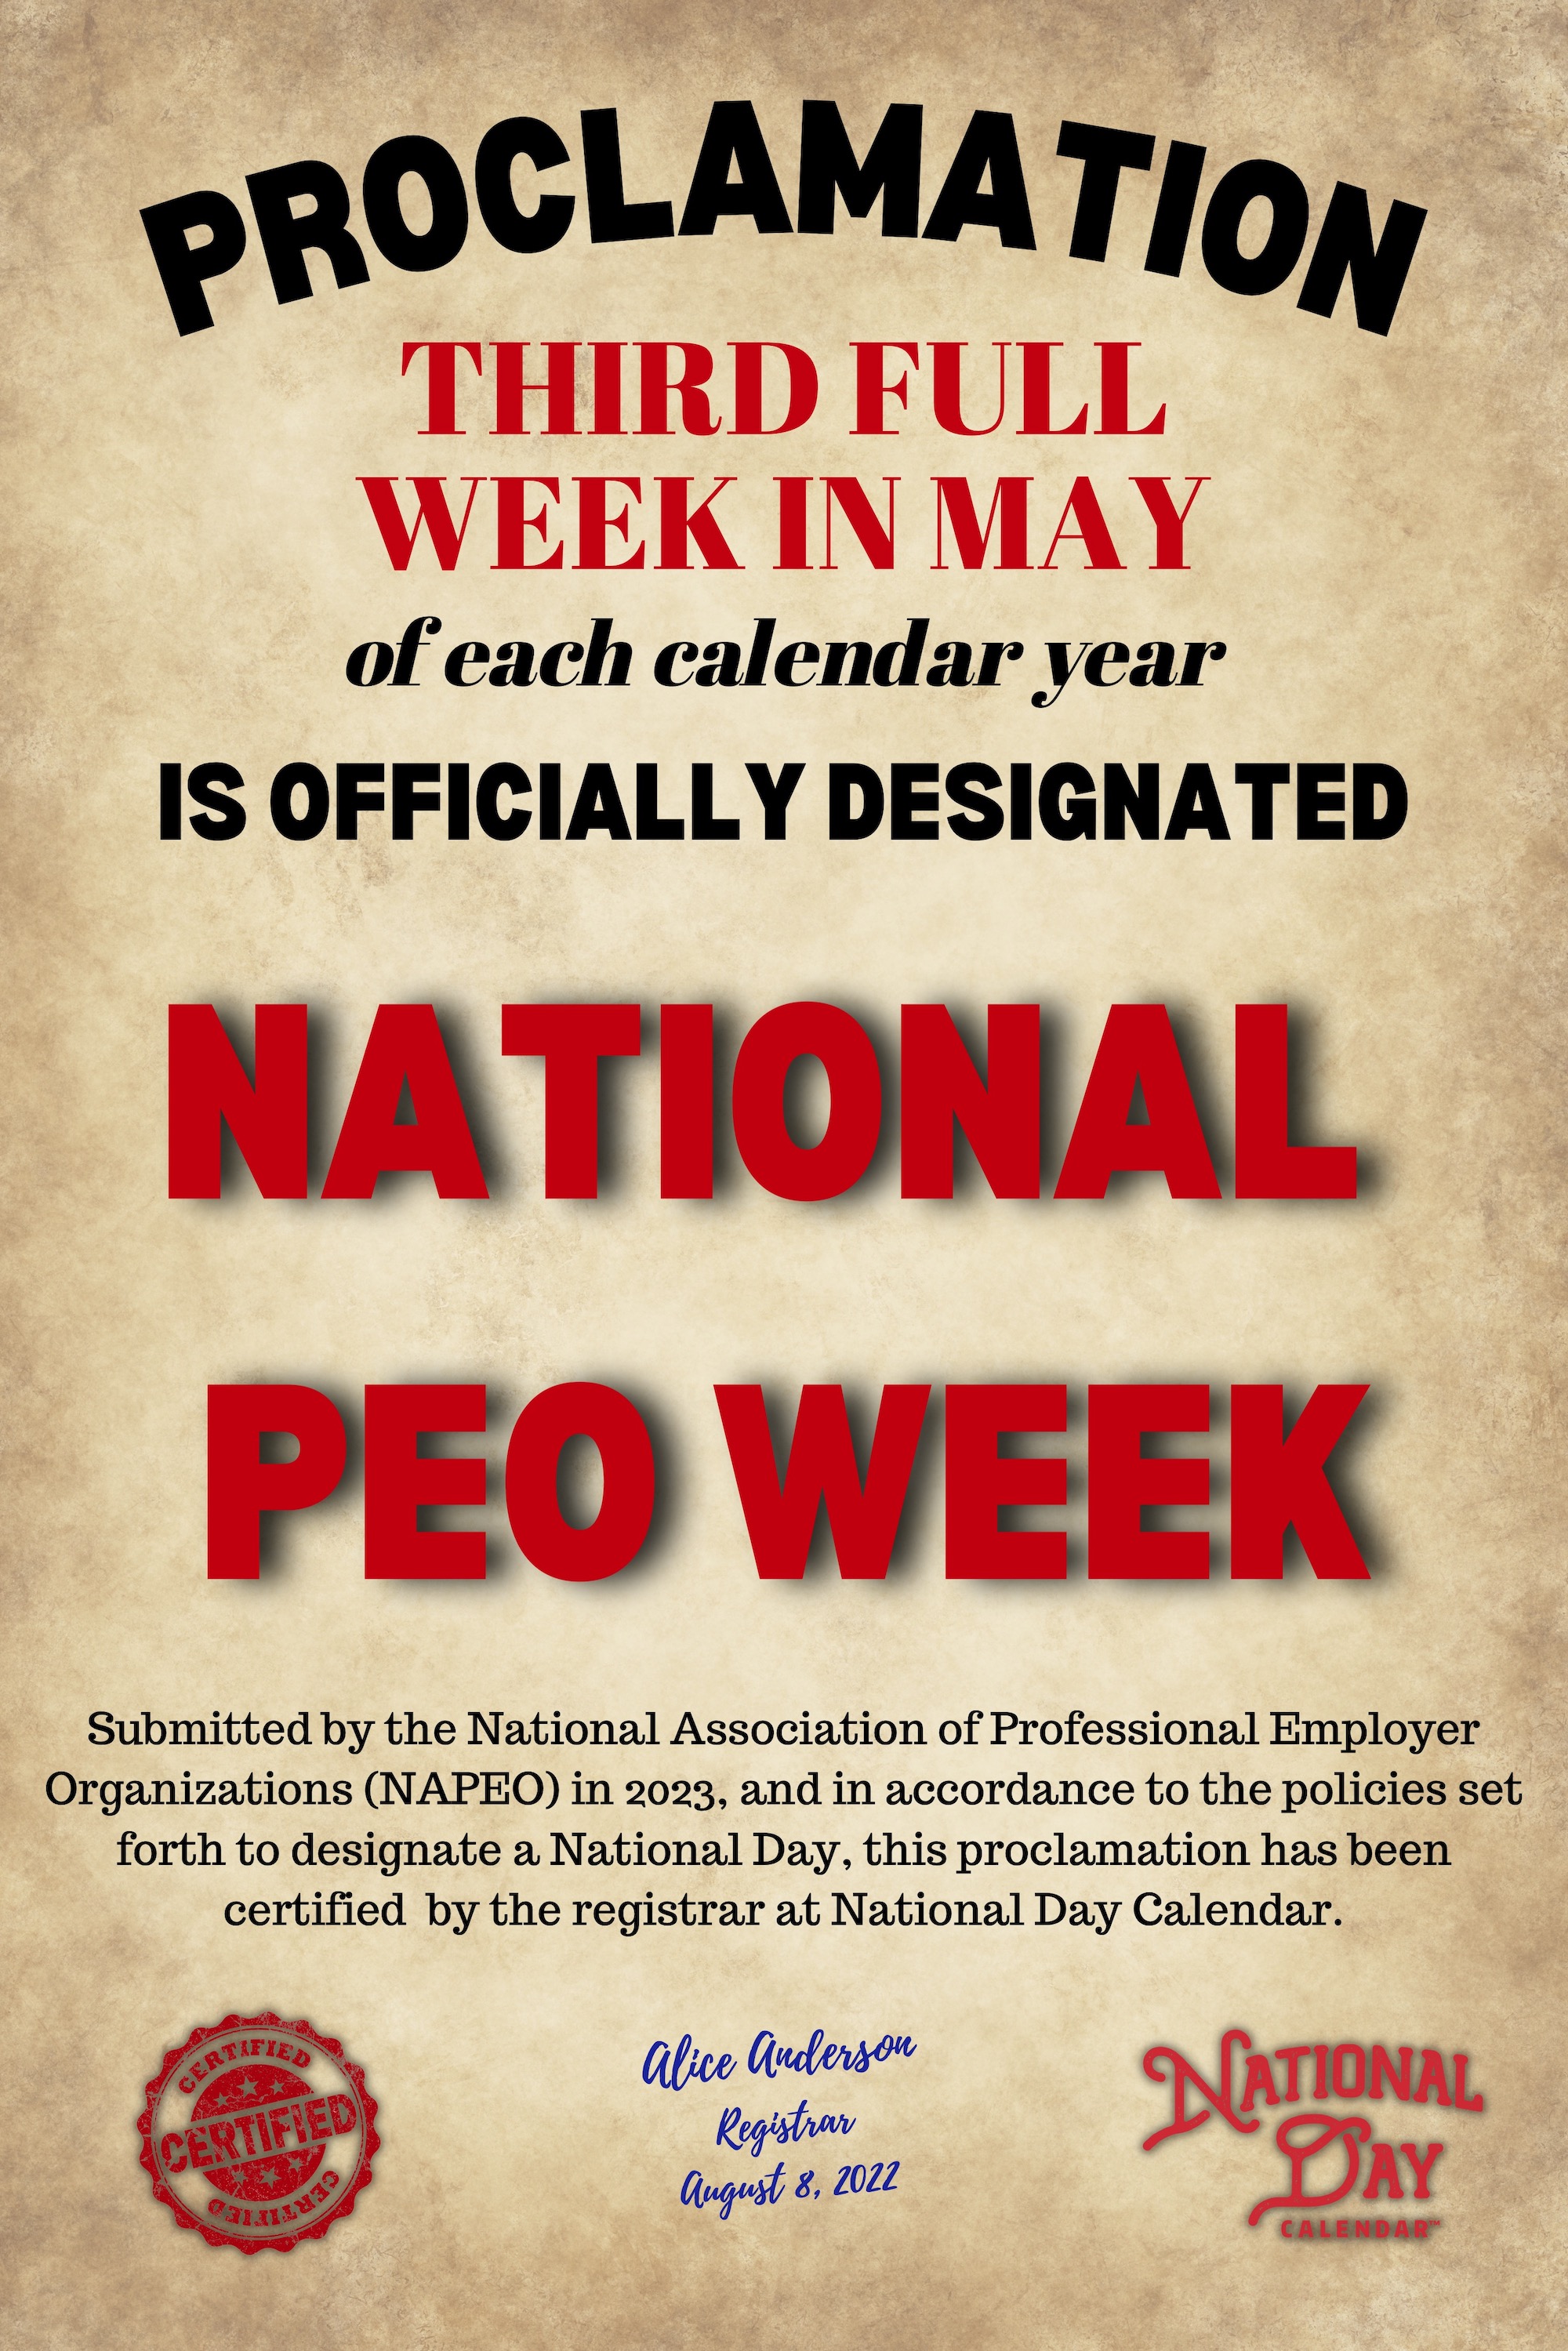 Image linking to PDF from the National Day Calendar organization certifying the third full week in May as National PEO Week.